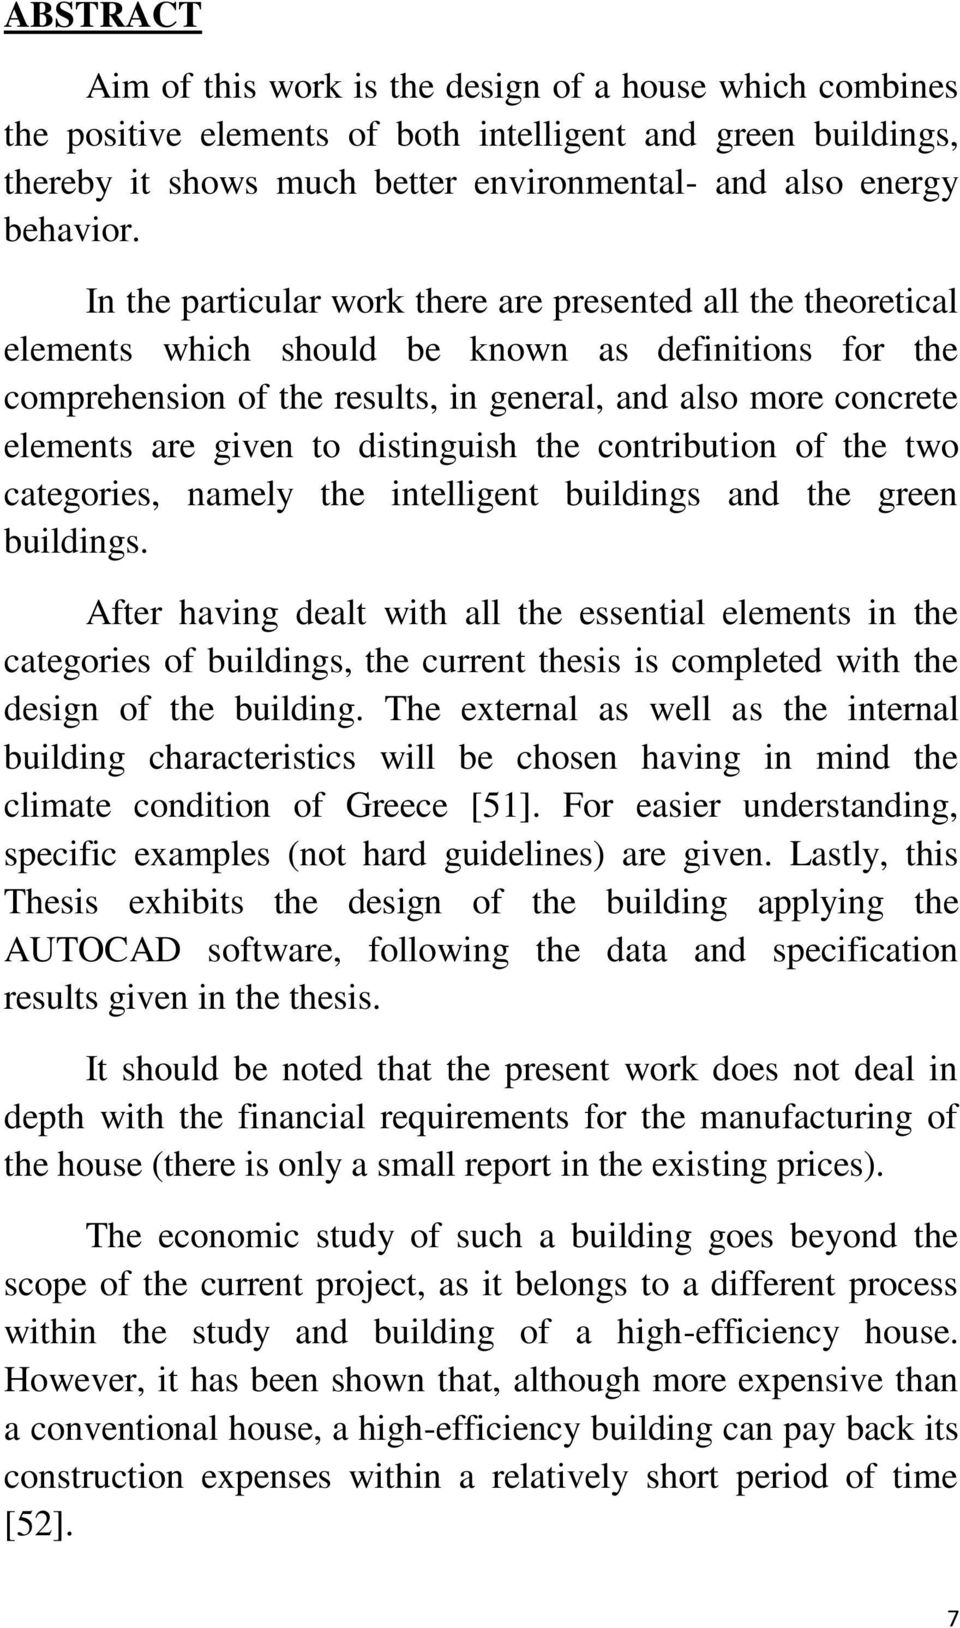 given to distinguish the contribution of the two categories, namely the intelligent buildings and the green buildings.